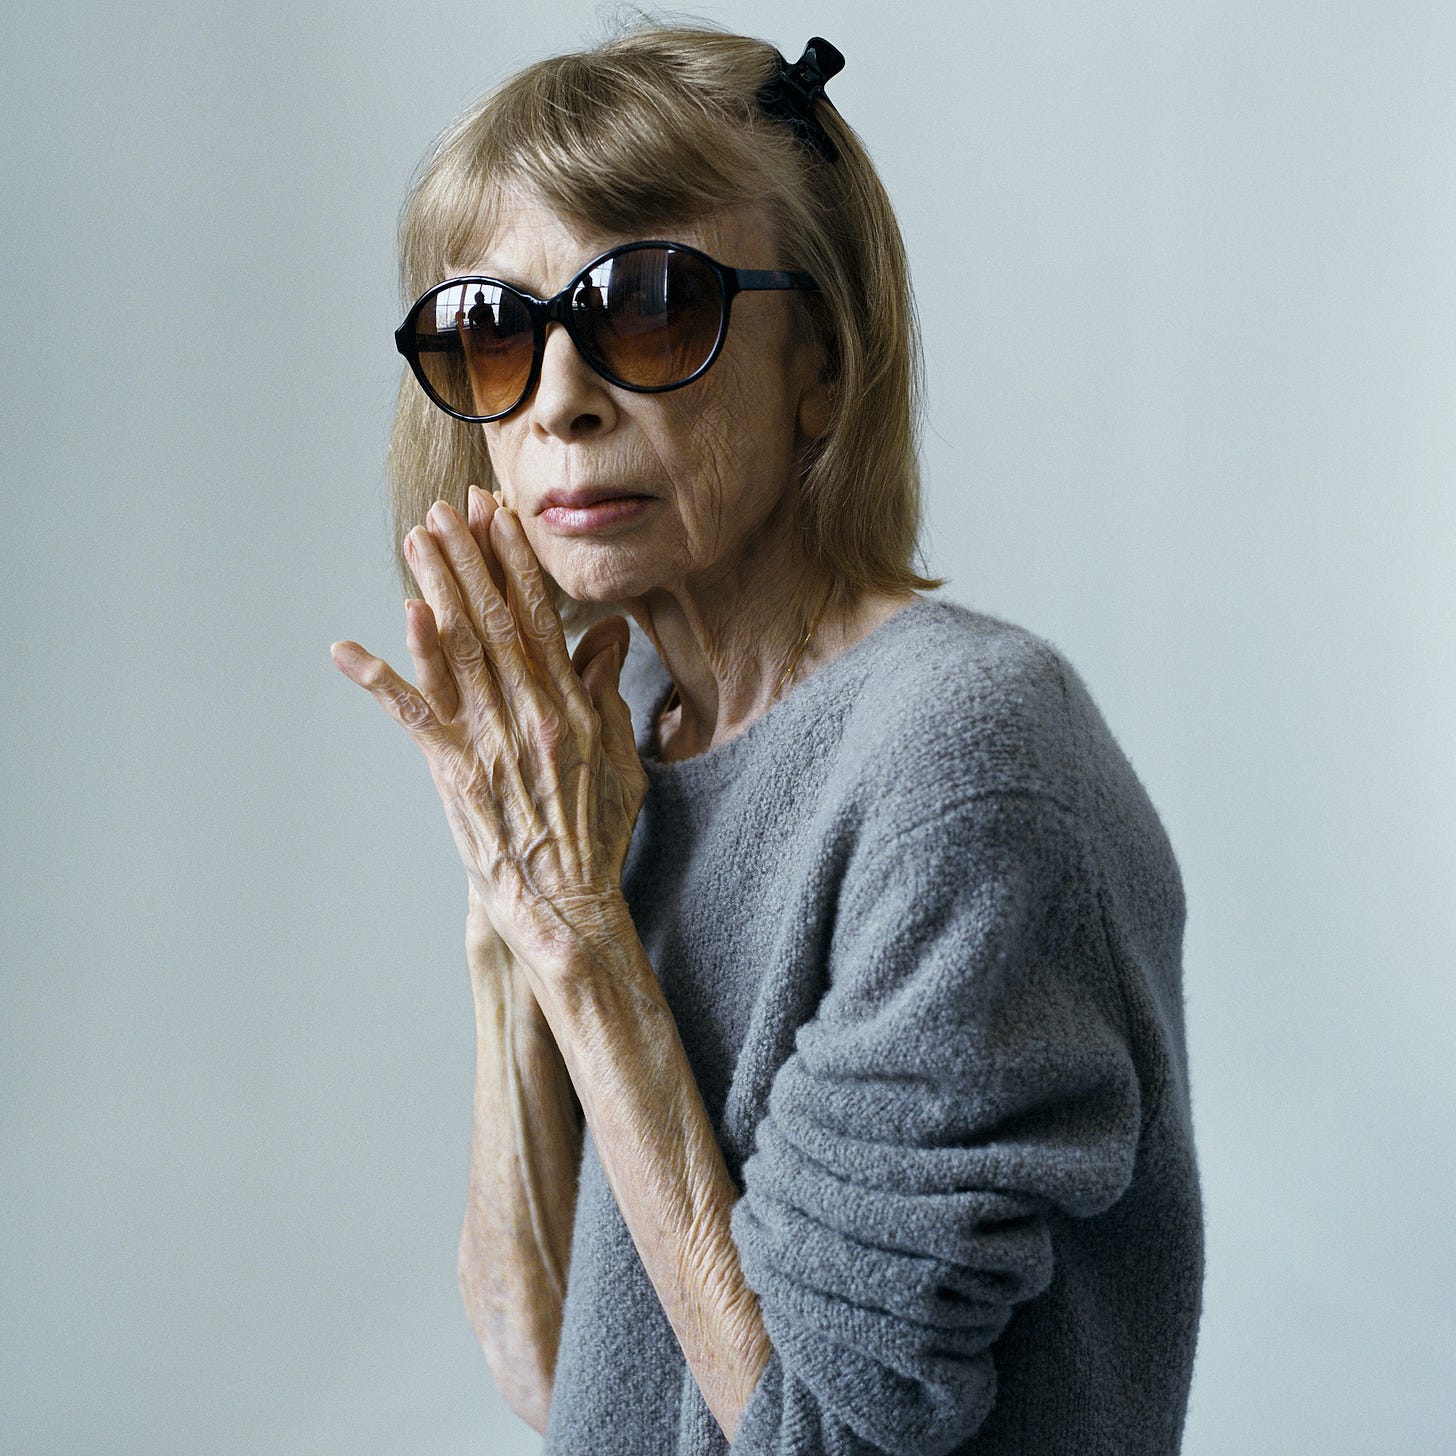 20 Questions for Joan Didion